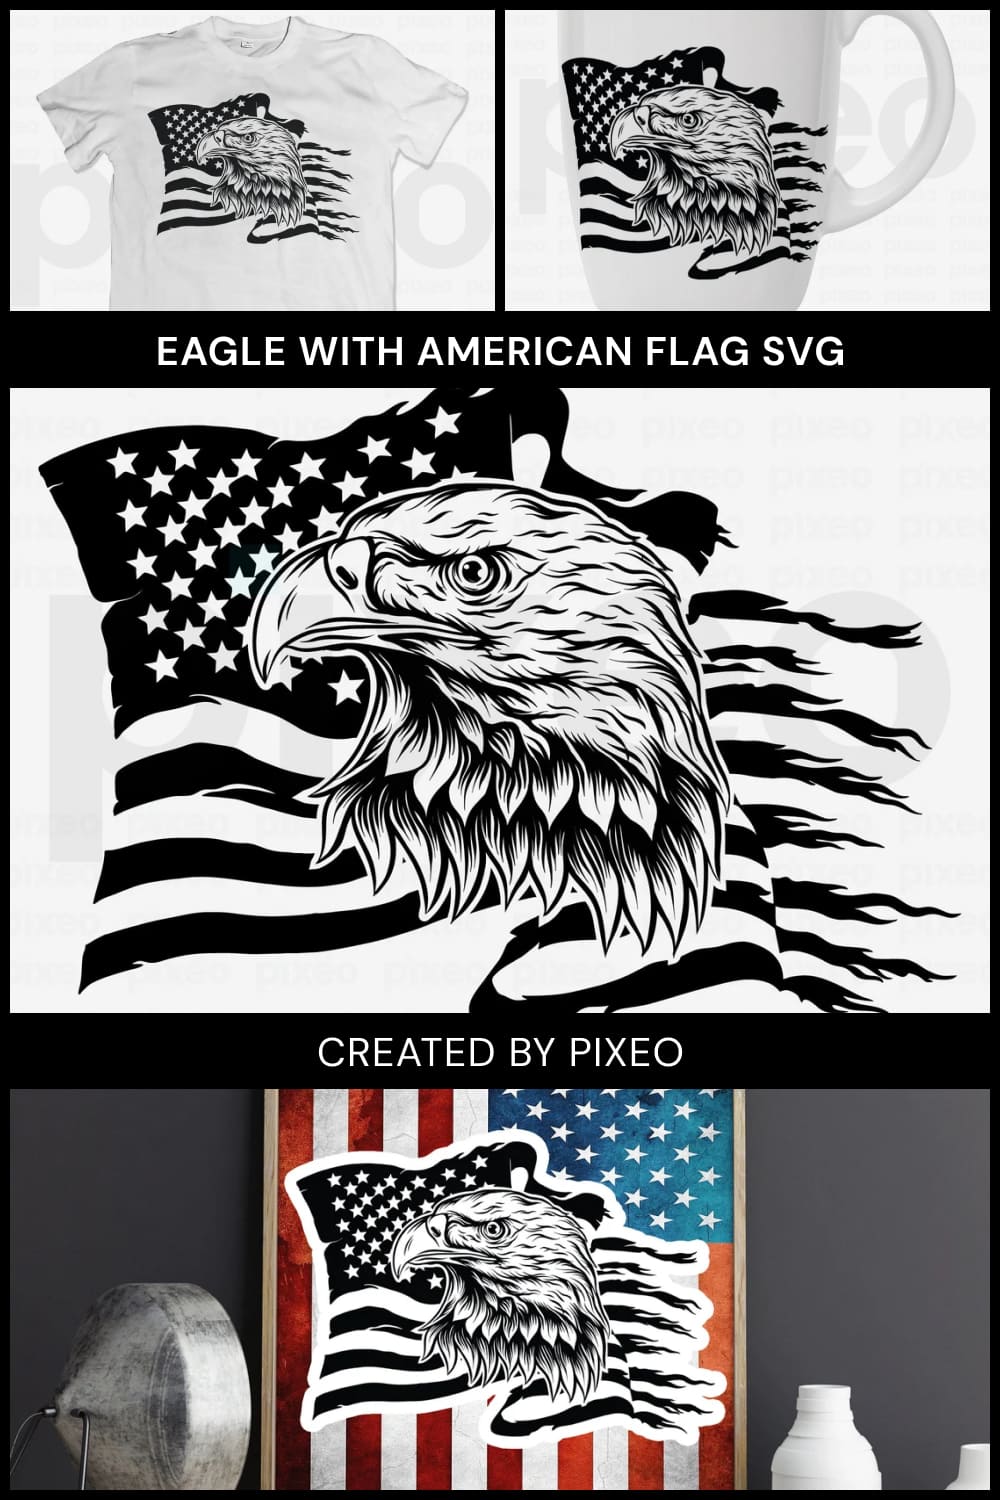 eagle with american flag svg pinterest image.